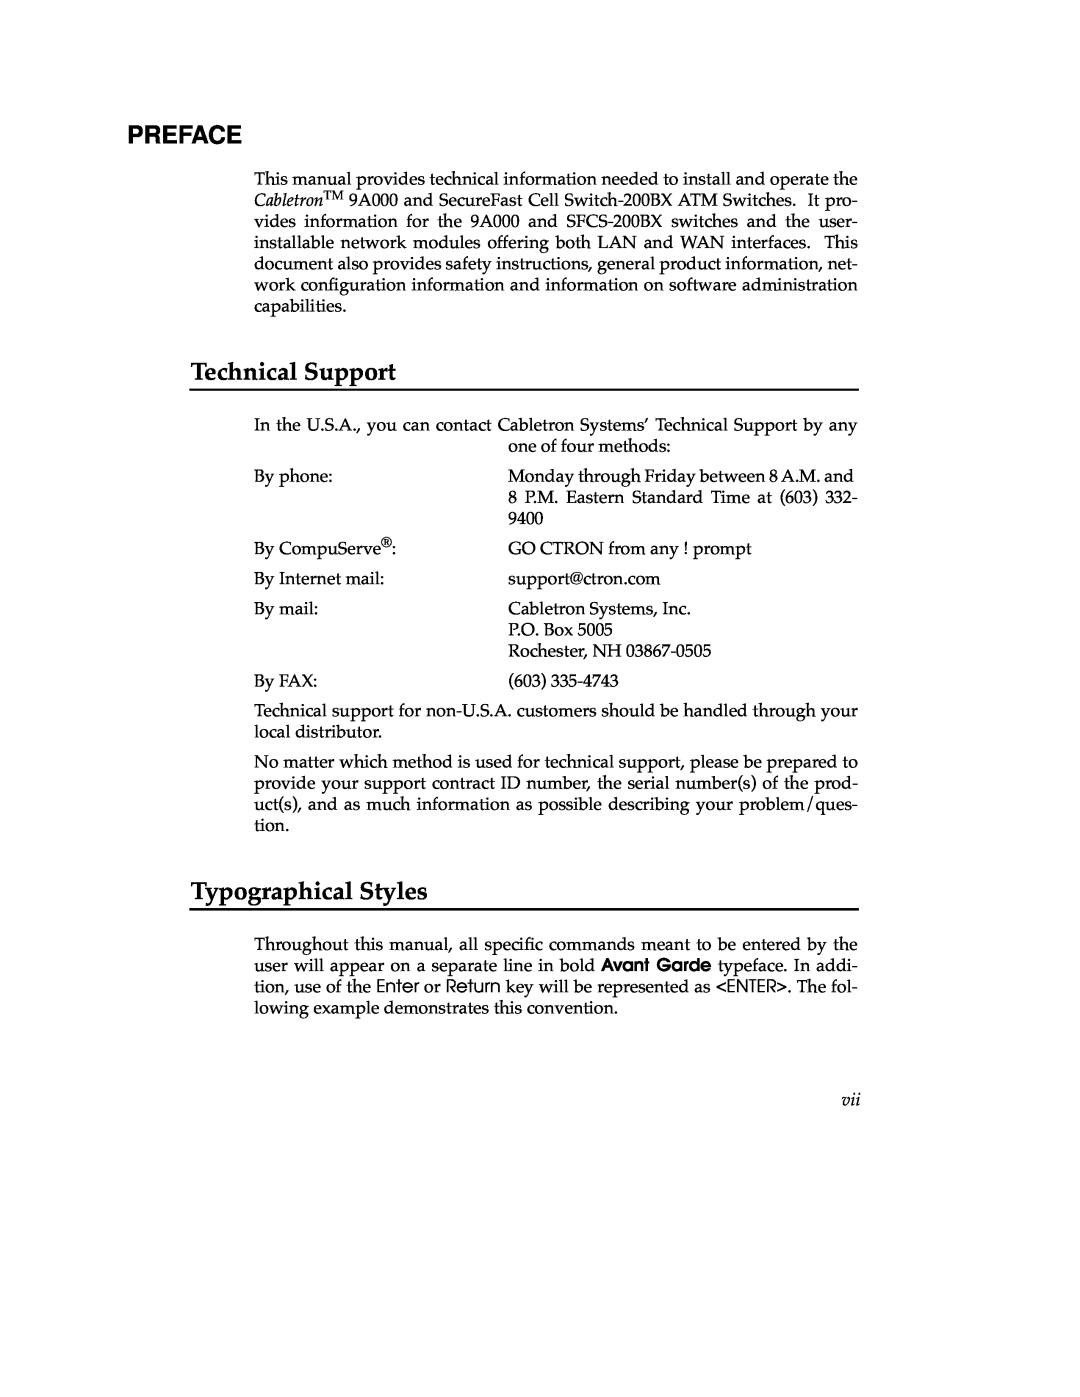 Cabletron Systems 9A000 manual Preface, Technical Support, Typographical Styles 